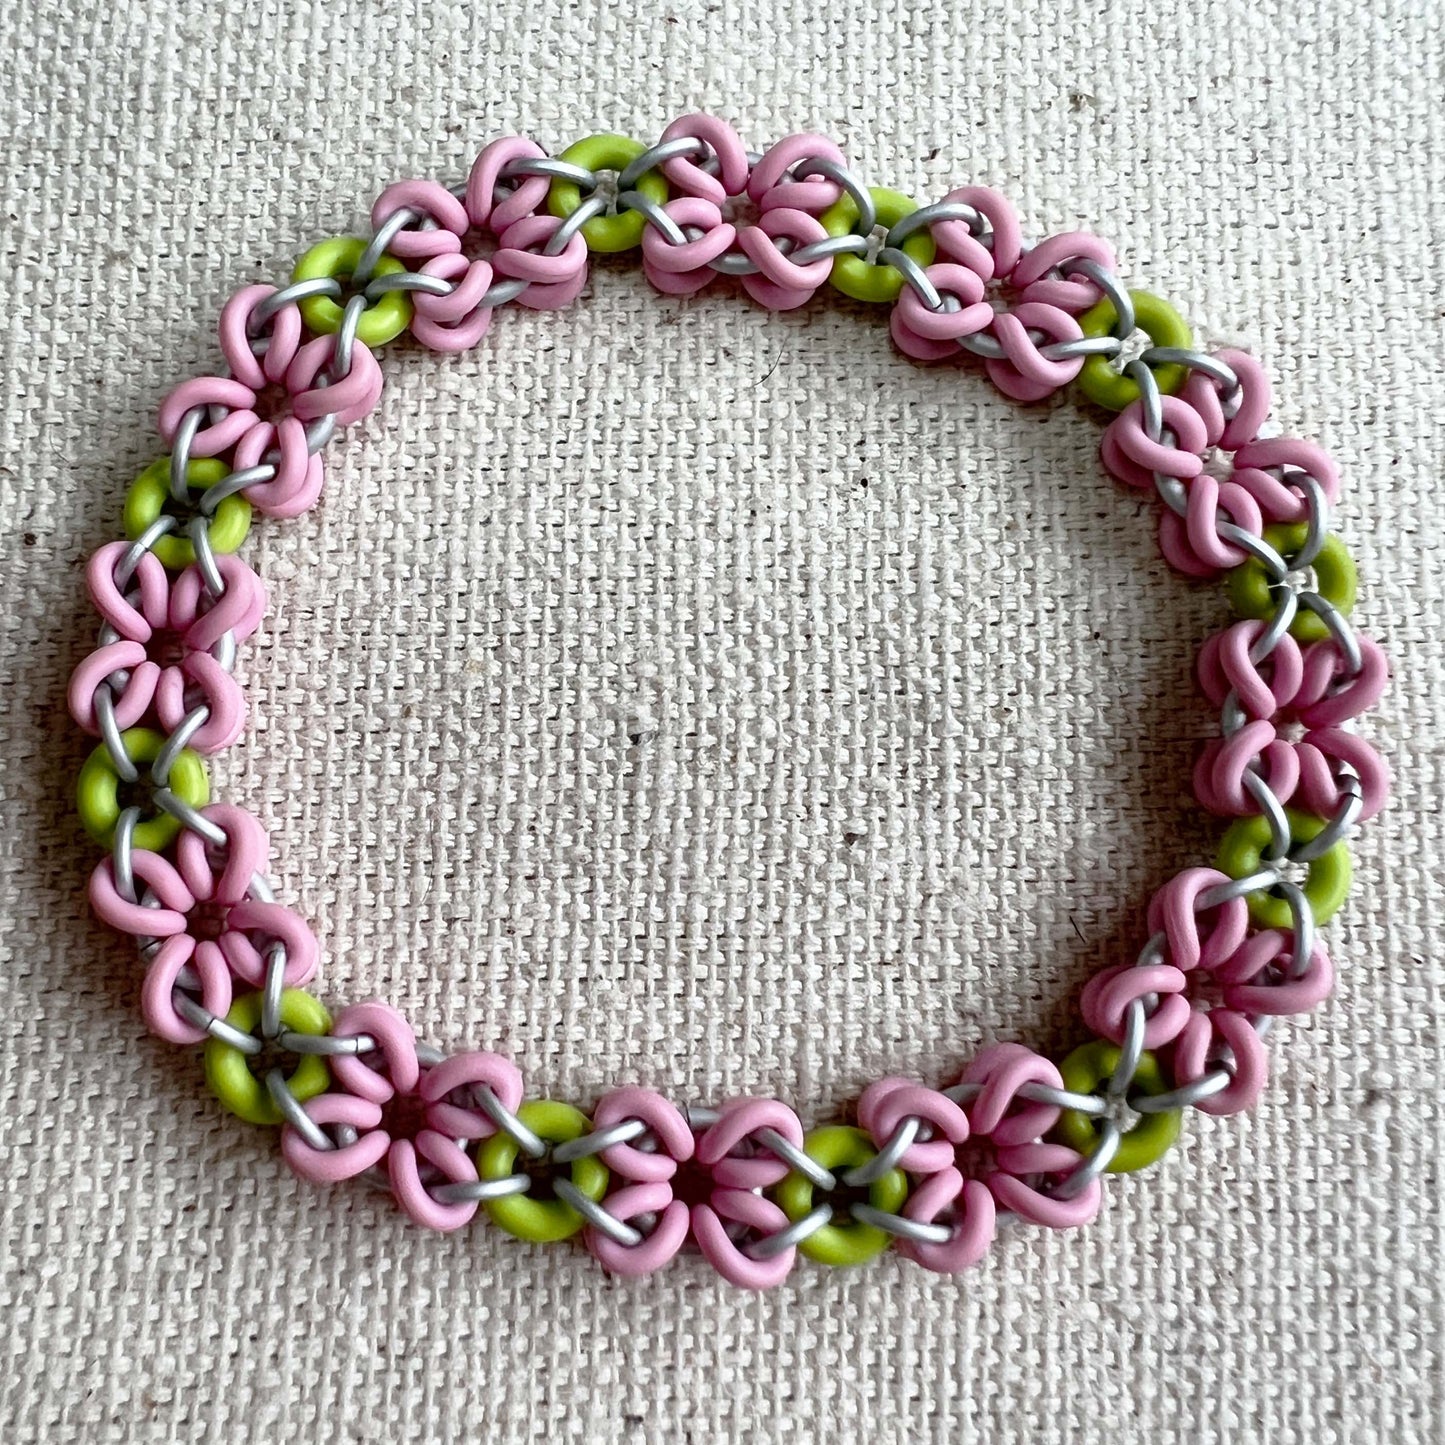 Dimensional Flower Stretch Bracelet kit with FREE video - Cupcake Pink and Bright Kiwi